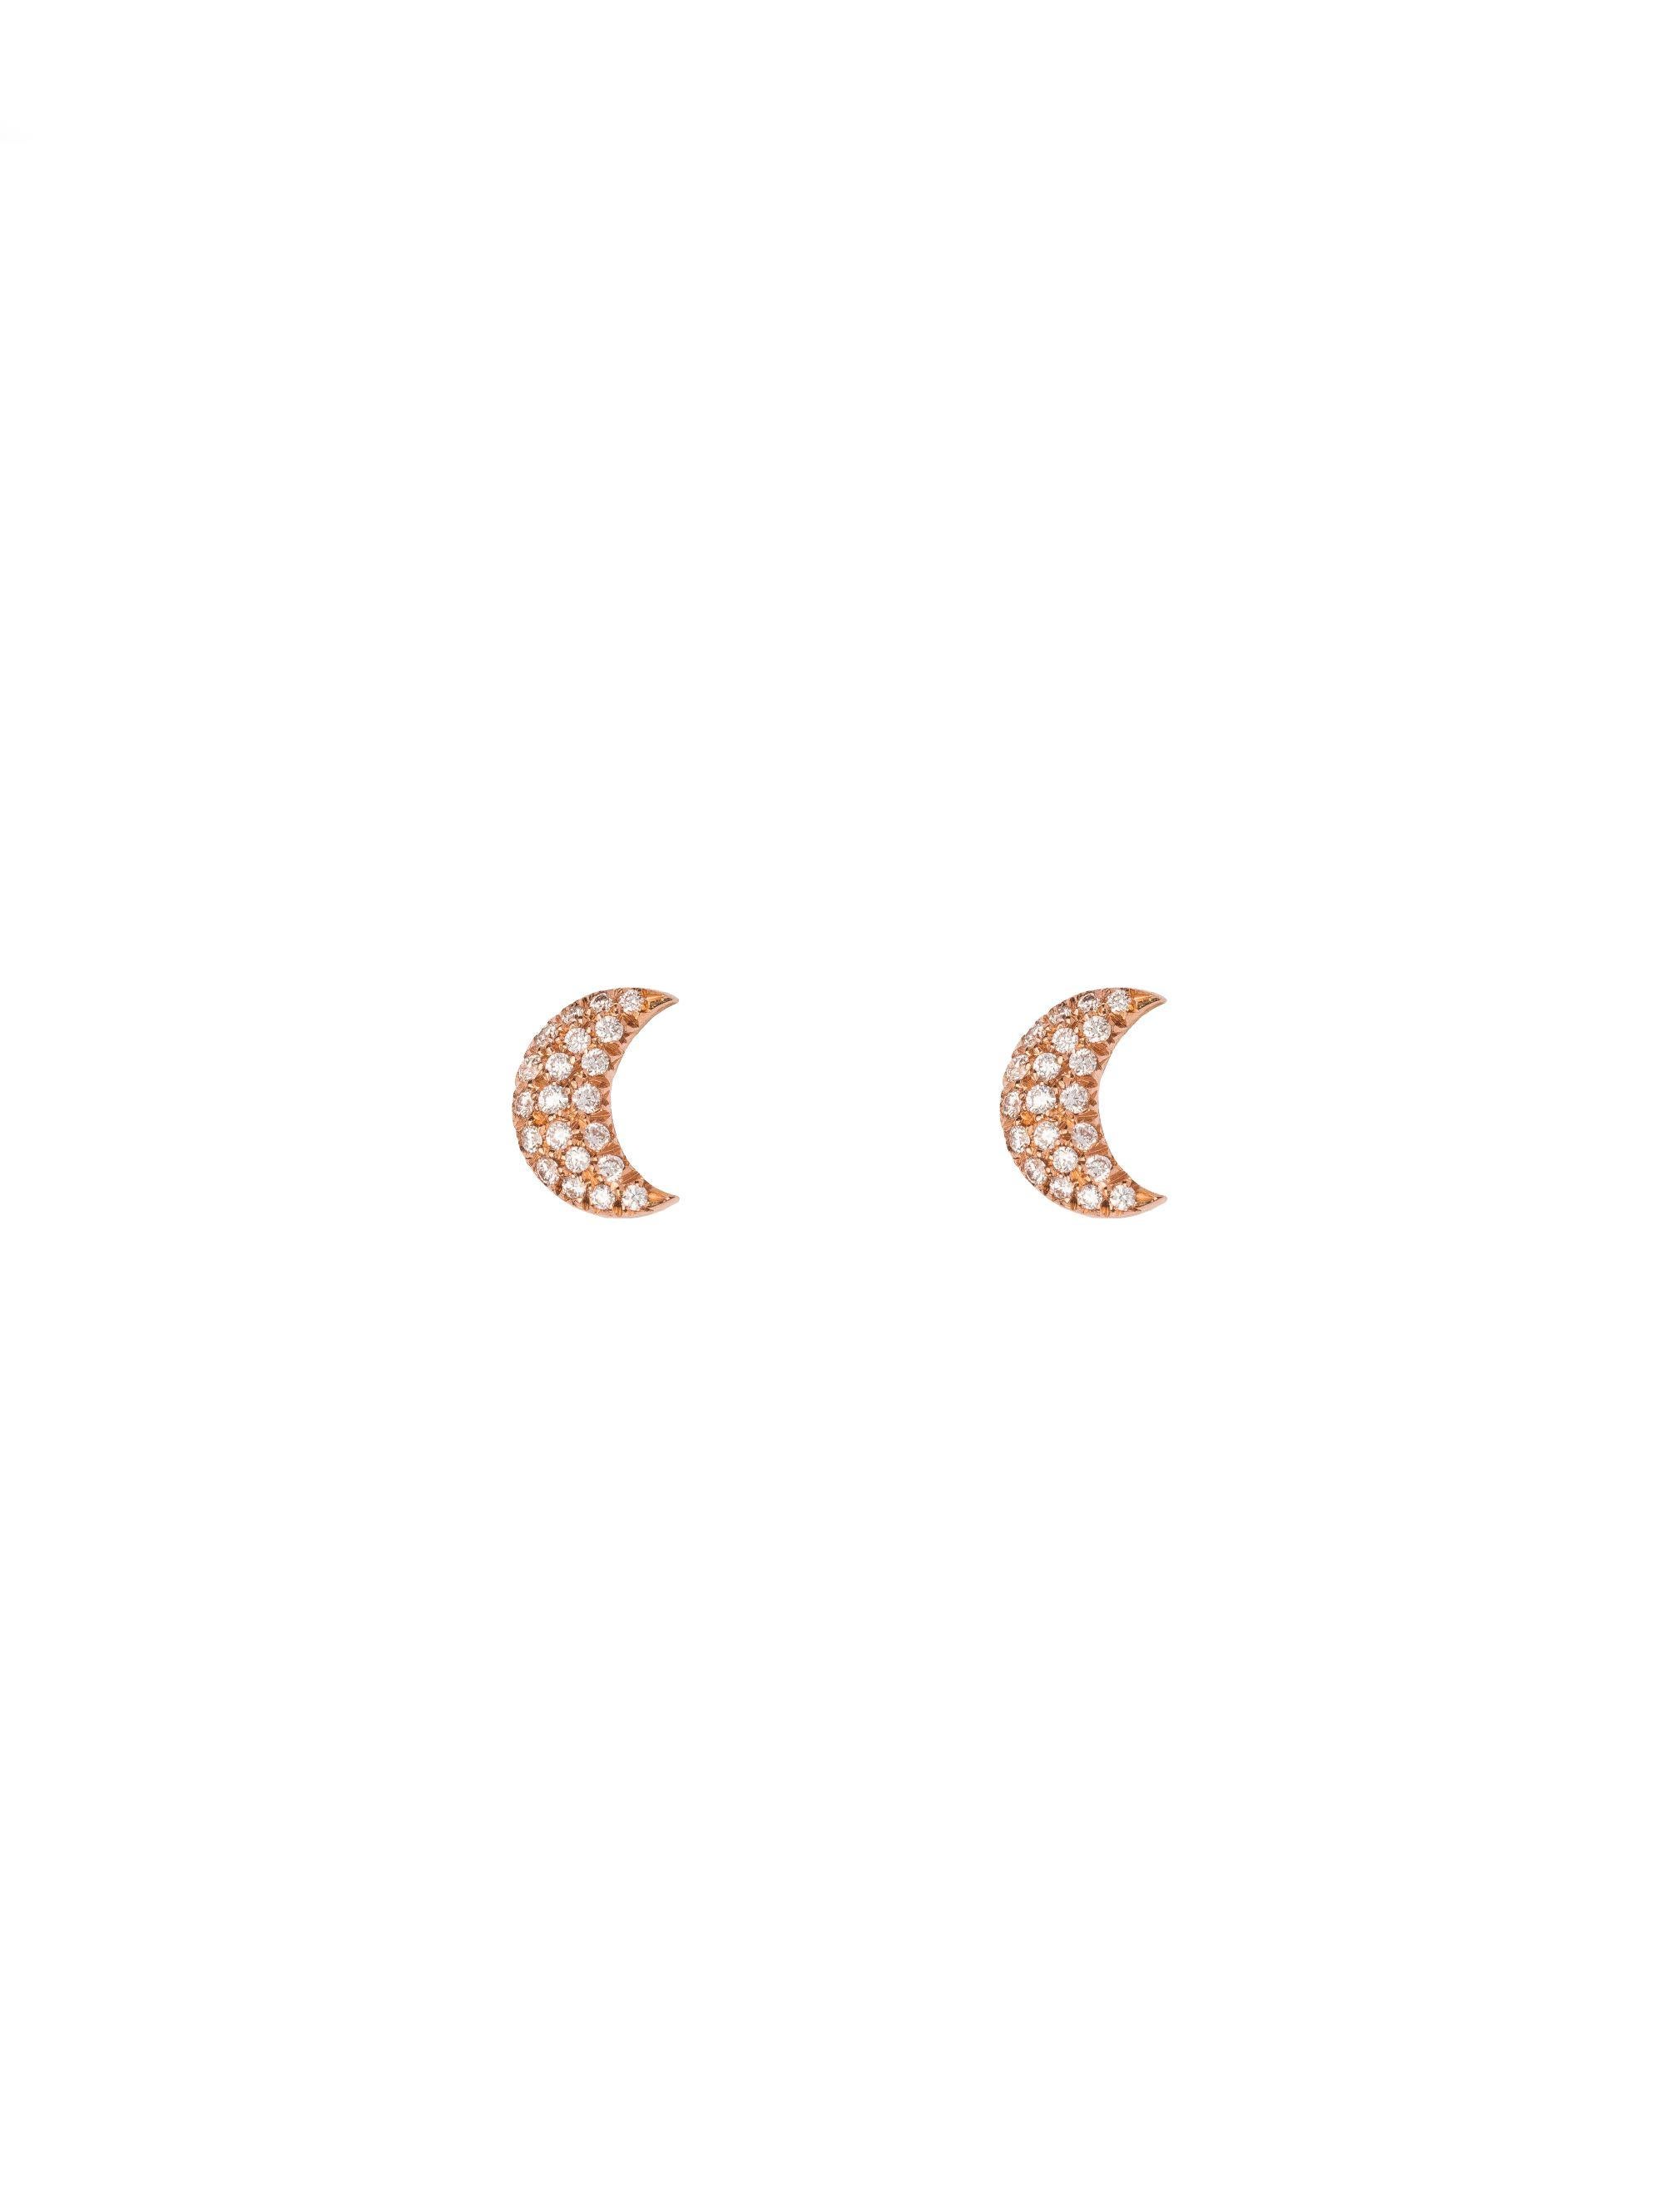 Pair of Celaeno Earrings

18kt rose gold, 0.21 ct White Diamonds, 2.12 gr total gold.
Add the Asterope ear chain in Opal or Turquoise to complete your cosmic look!
Handmade in Italy.
*Due to Covid-19 situation, we may have delivery delays.

Item